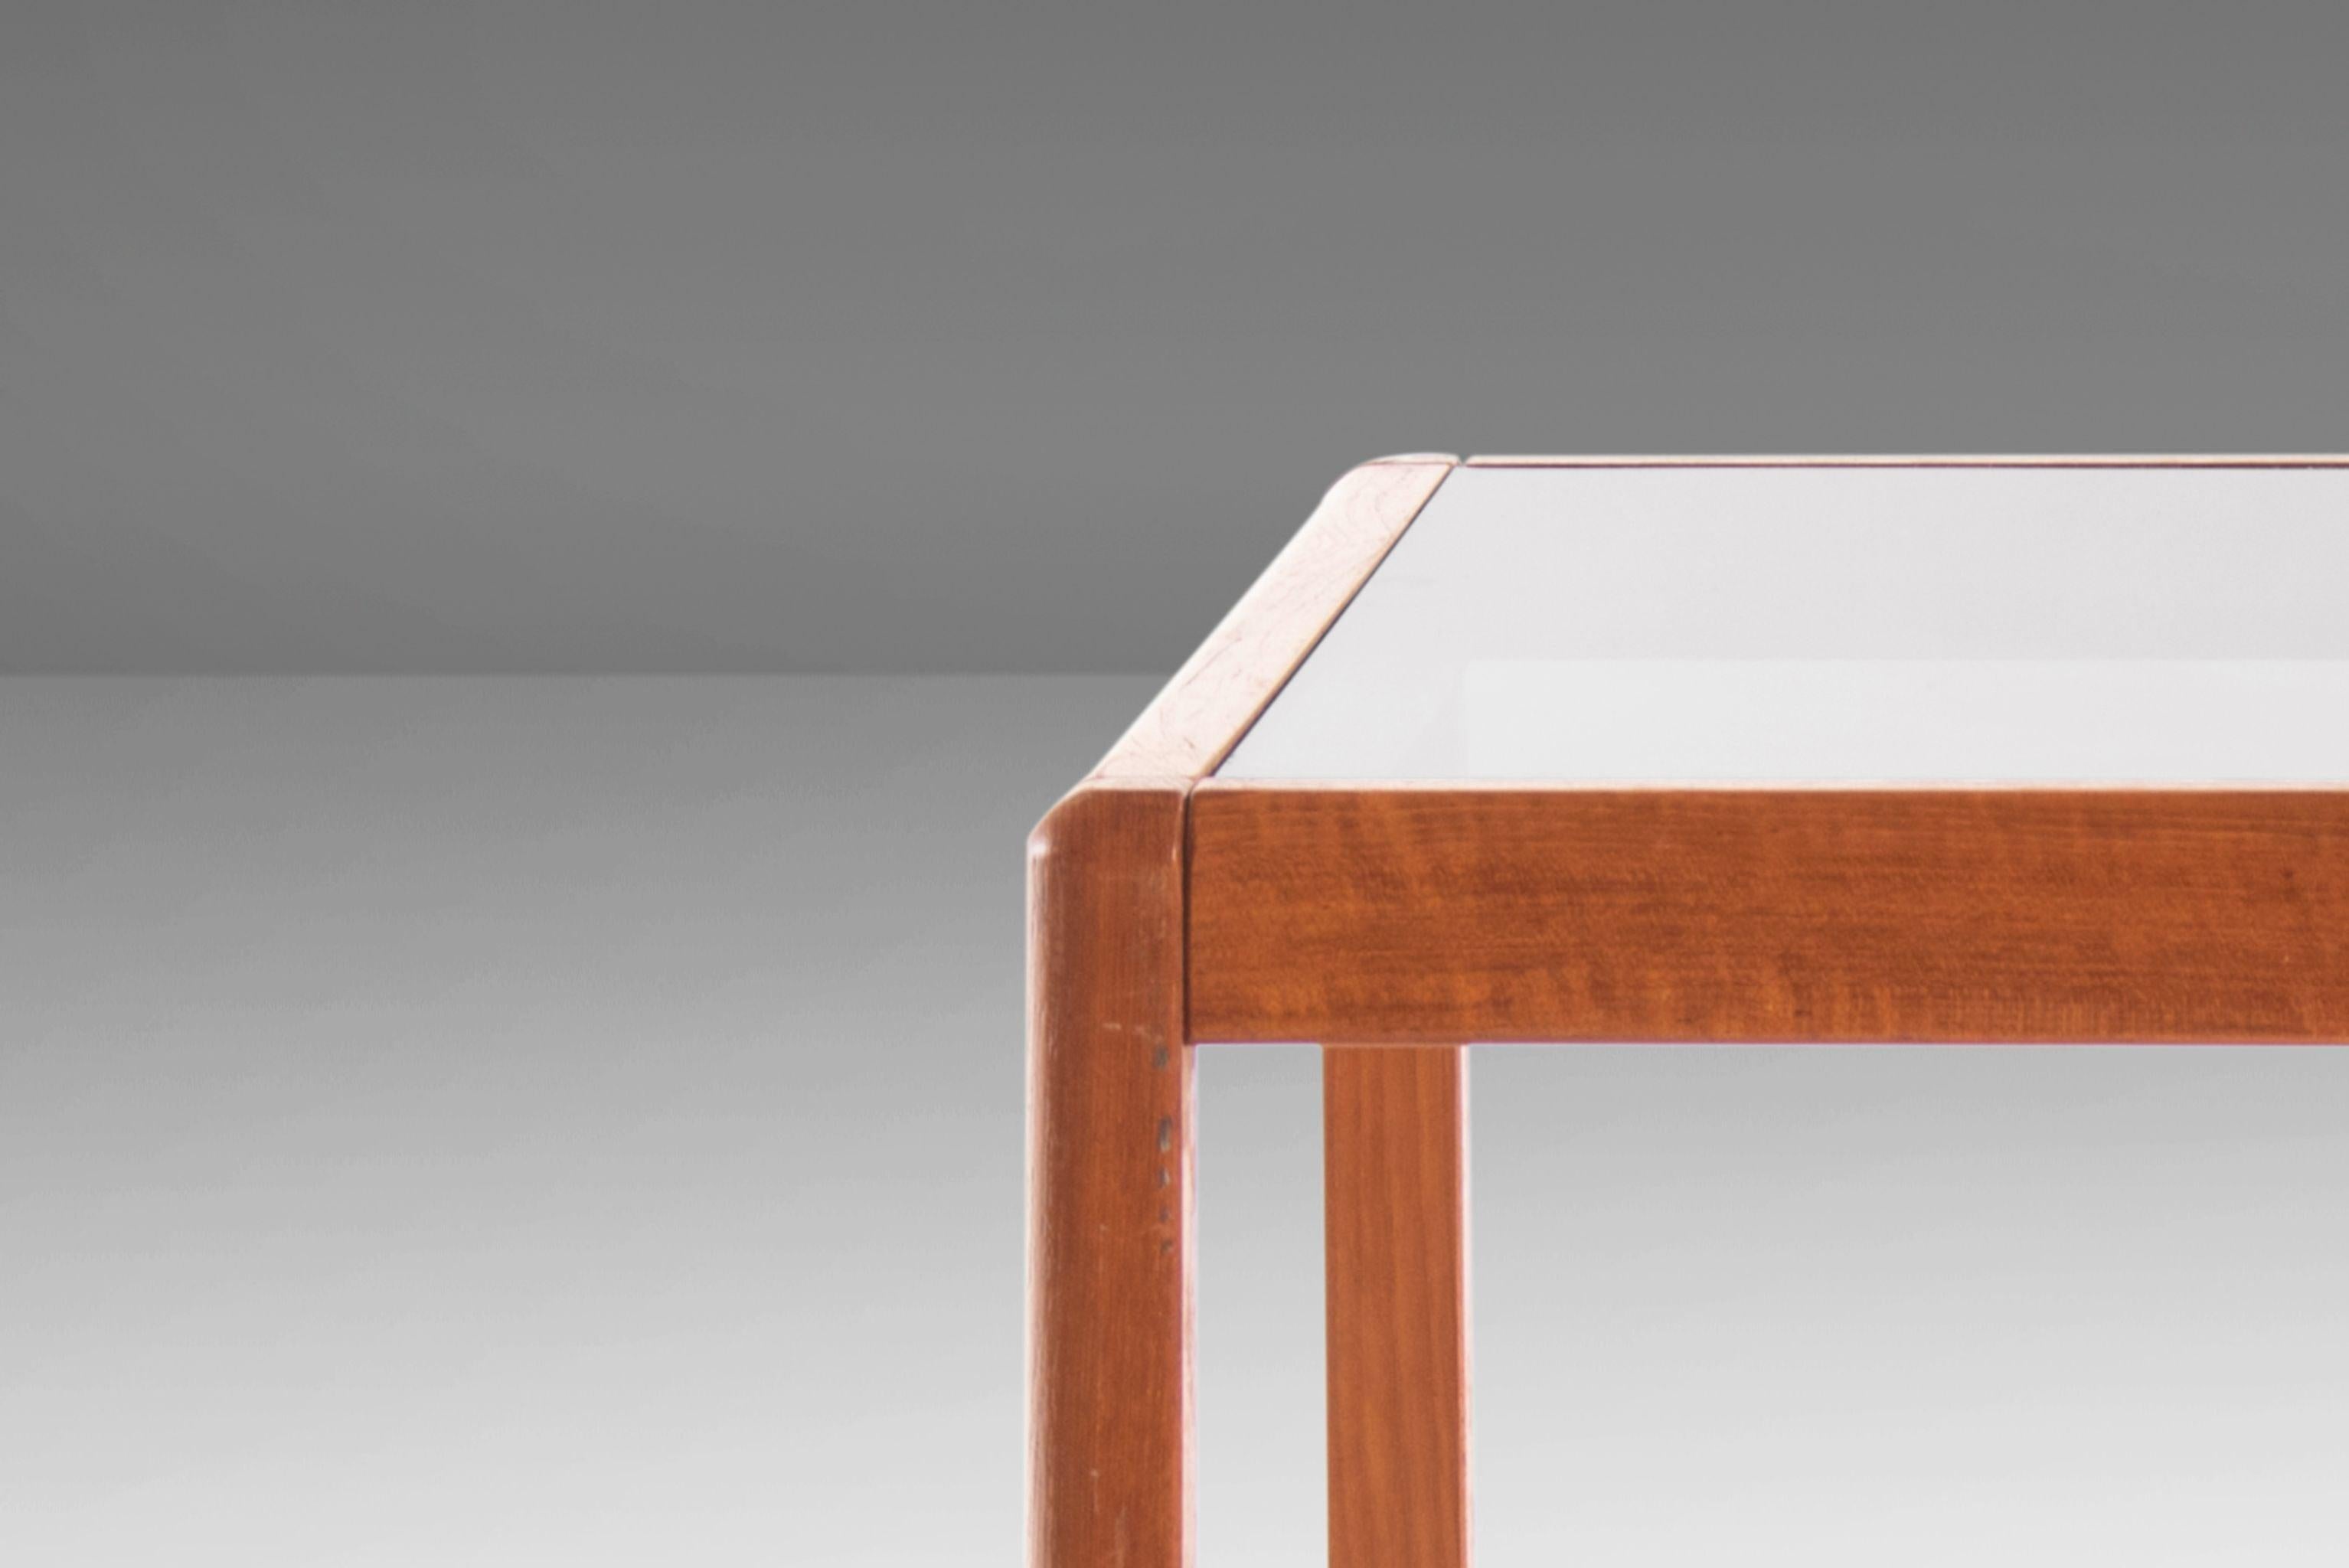 Minimalist Danish Modern Teak End Tables with Smoked Glass Tops, c. 1970's 6